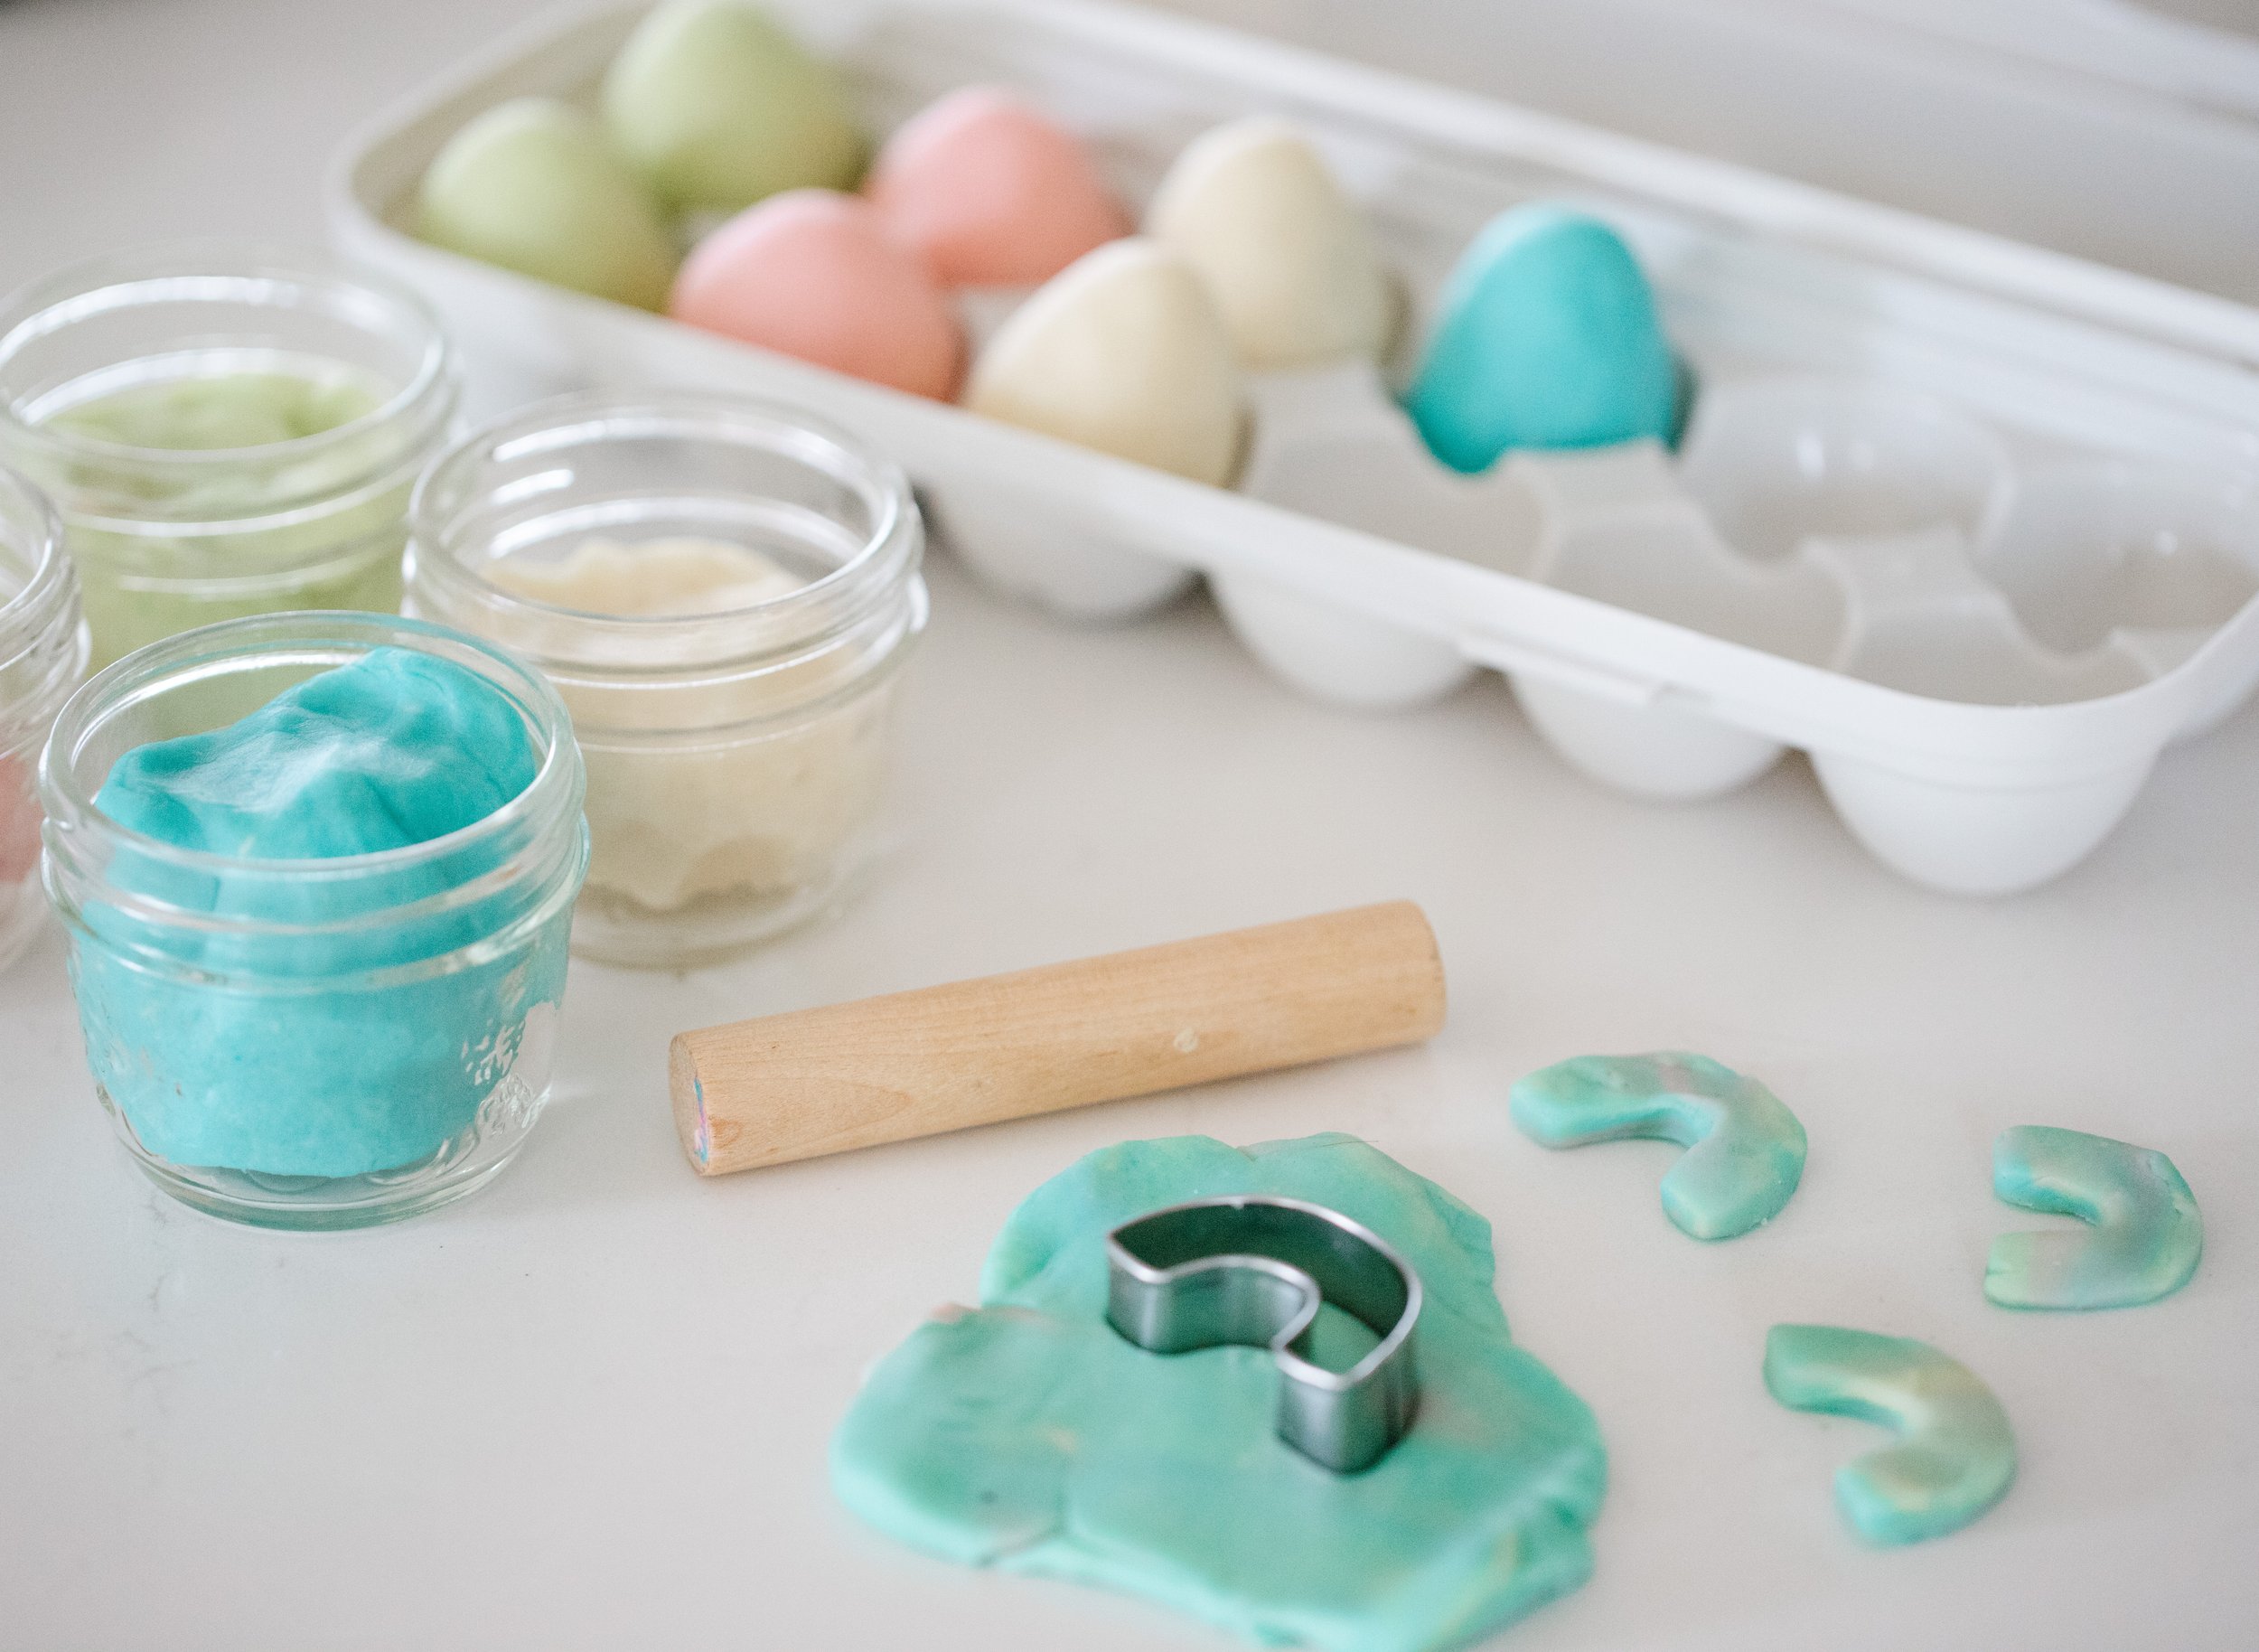 5-Minute Non-Toxic Easy Homemade Playdough Recipe - Made In A Pinch